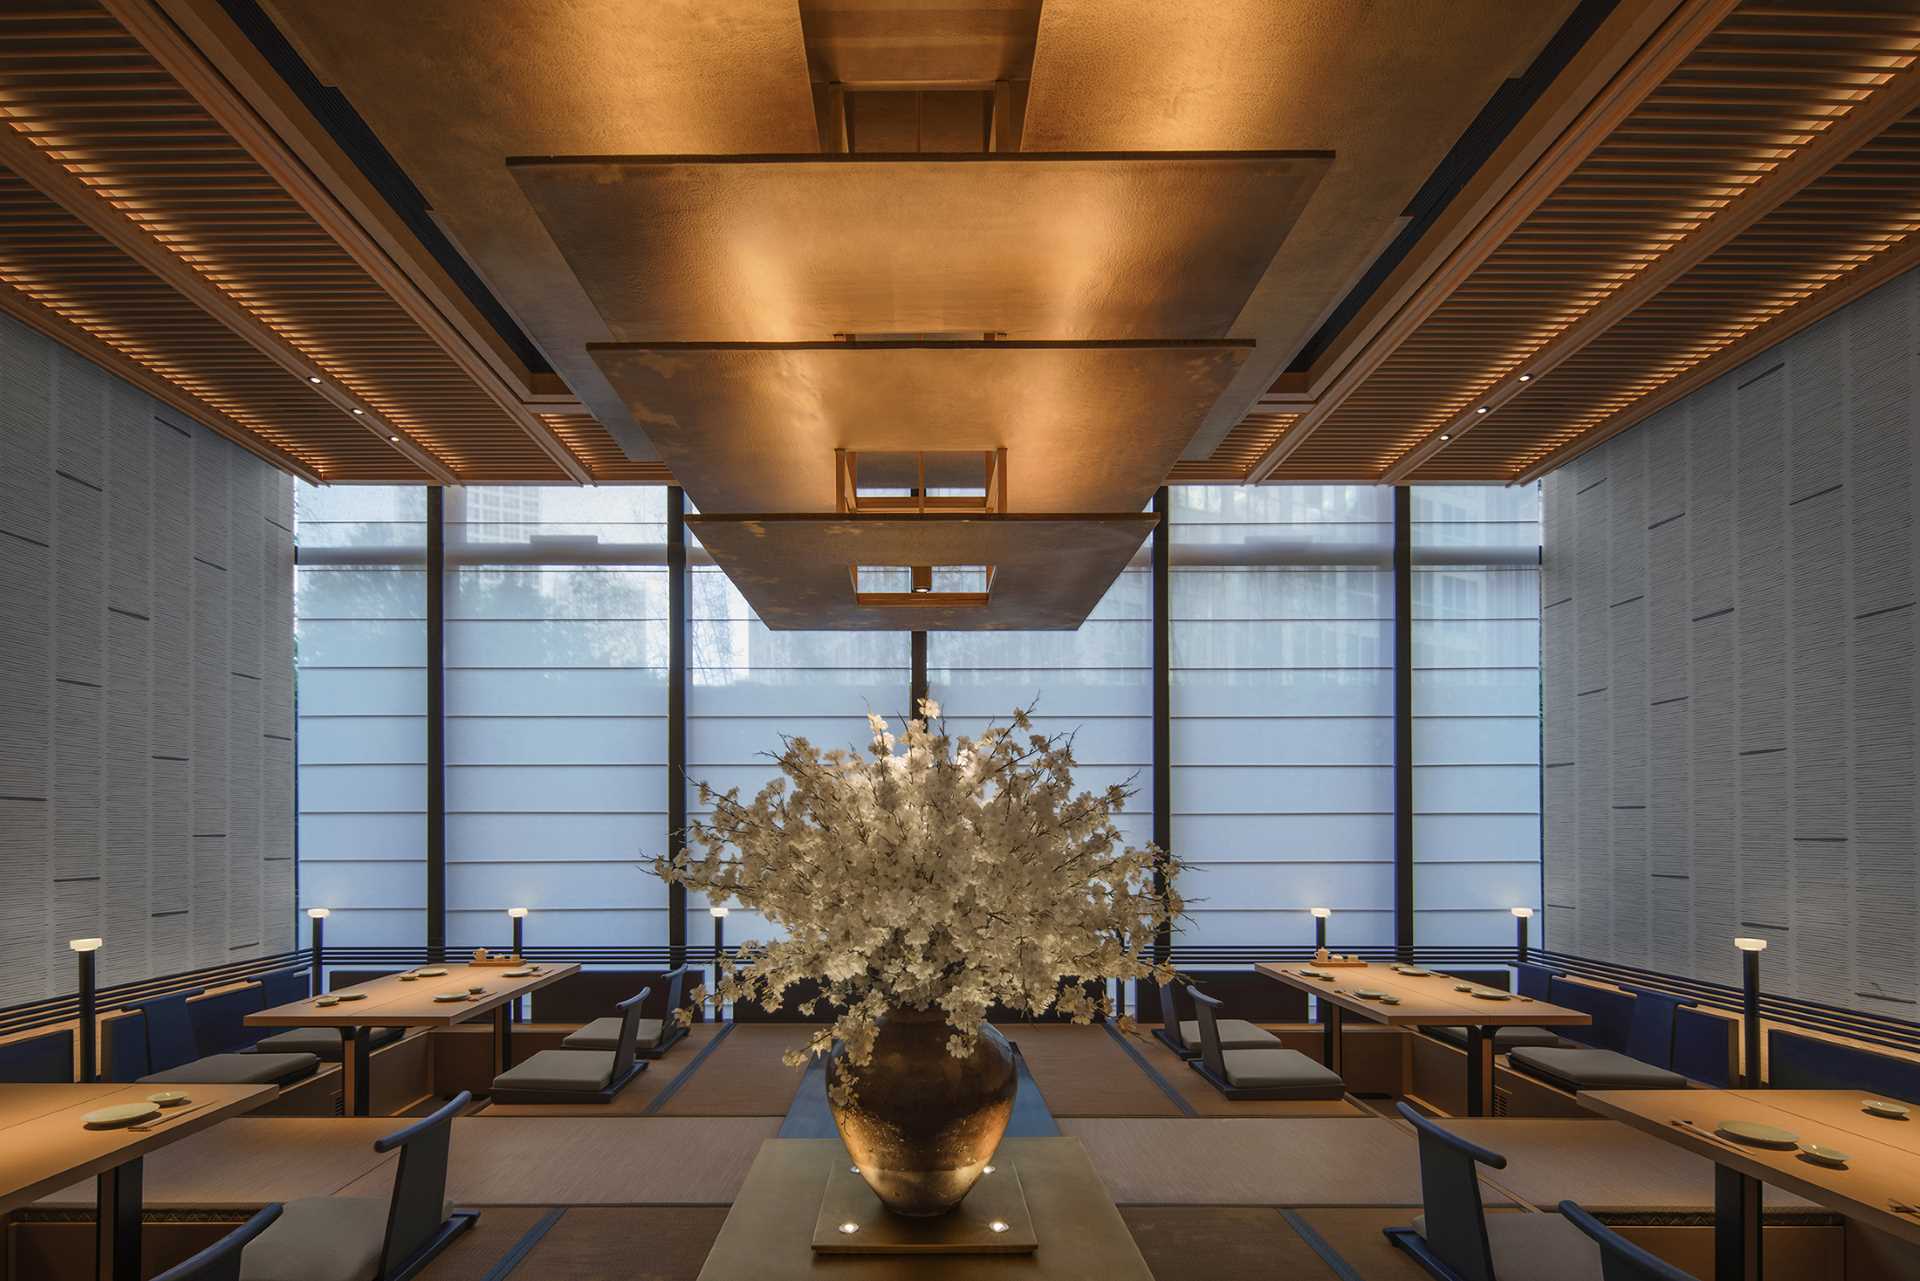 A modern Japanese-inspired restaurant uses wood and lighting to create a warm and inviting atmosphere